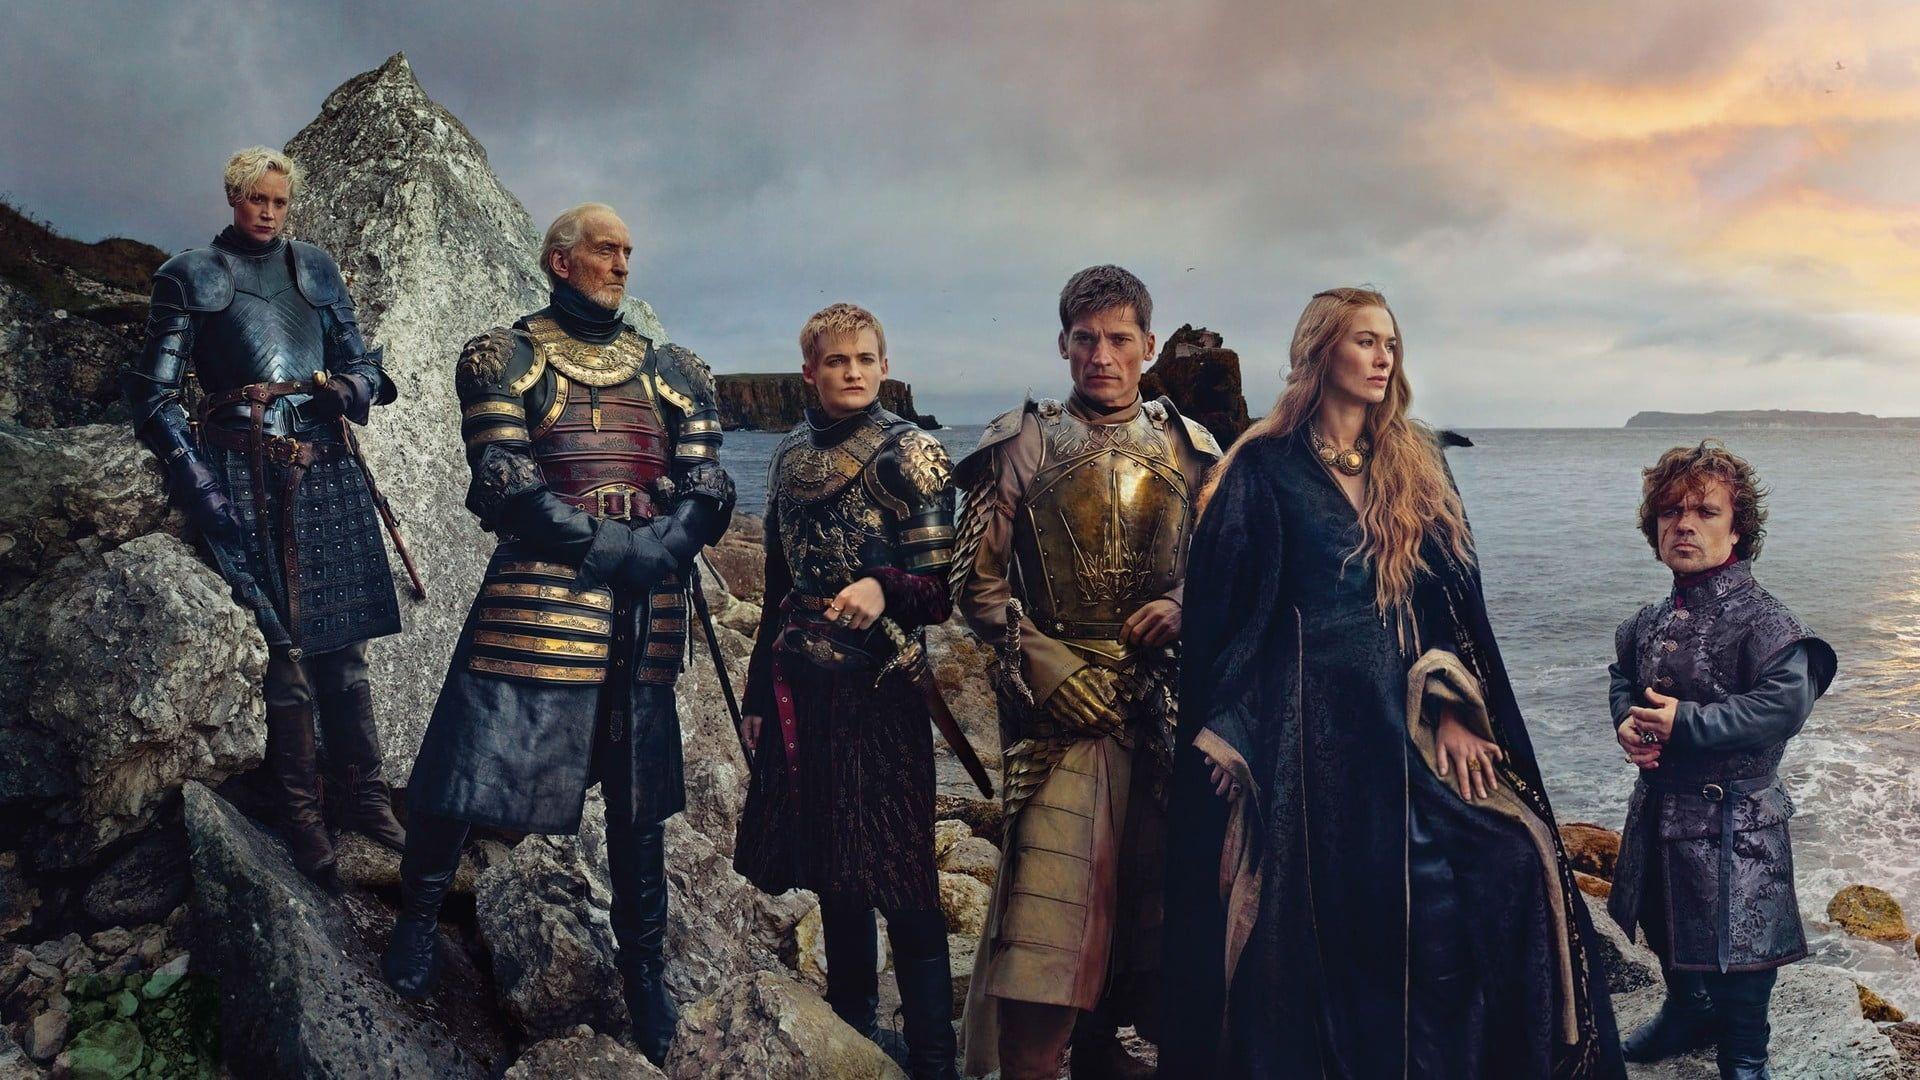 Game Of Thrones cast, Game of Thrones, TV, Tyrion Lannister, Cersei